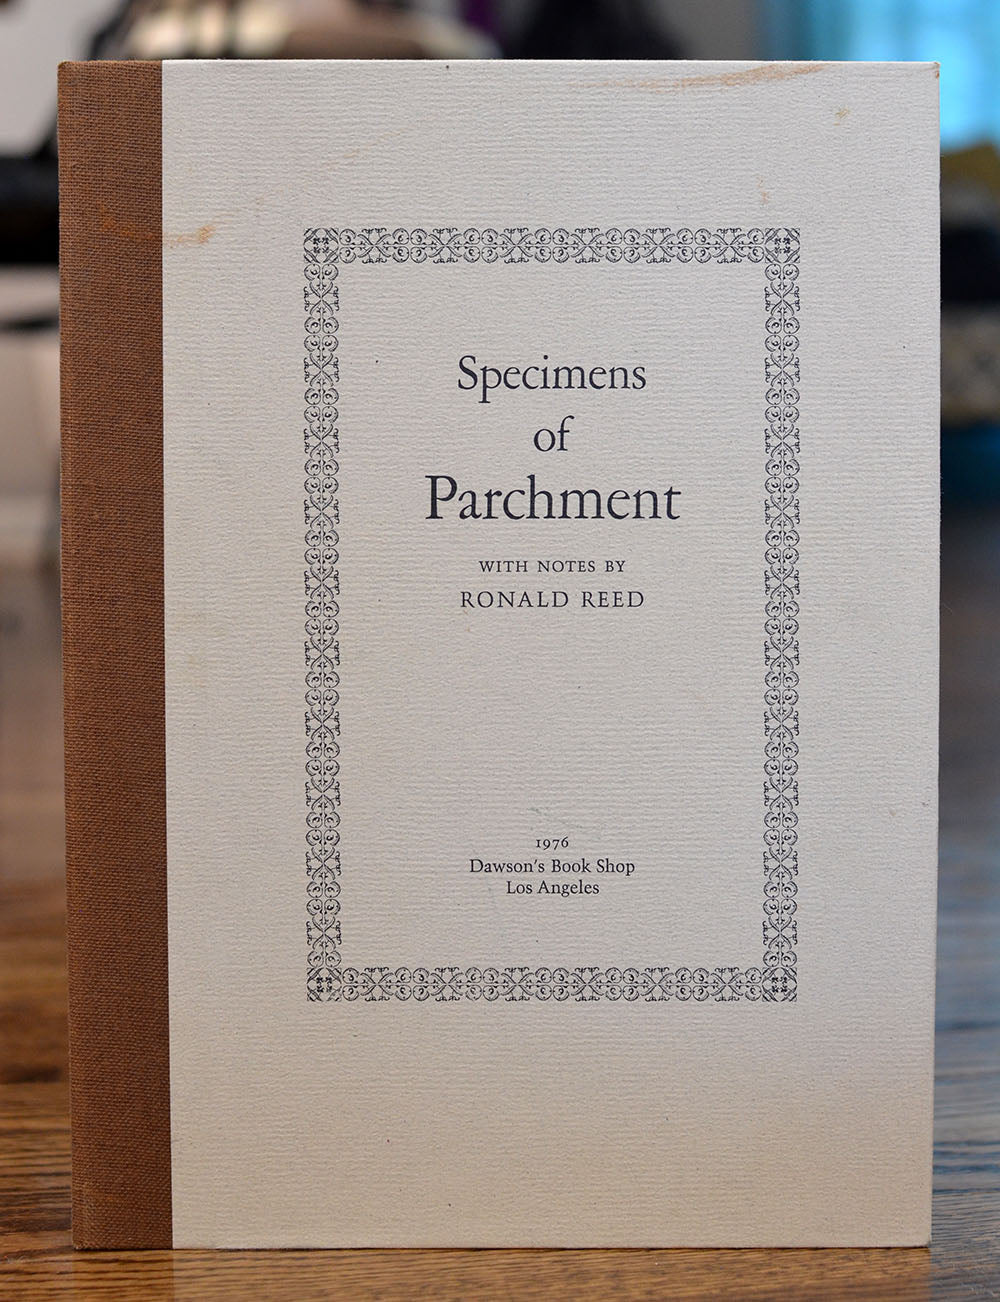 [Vellum Samples] Specimens of Parchment with Notes by Ronald Reed